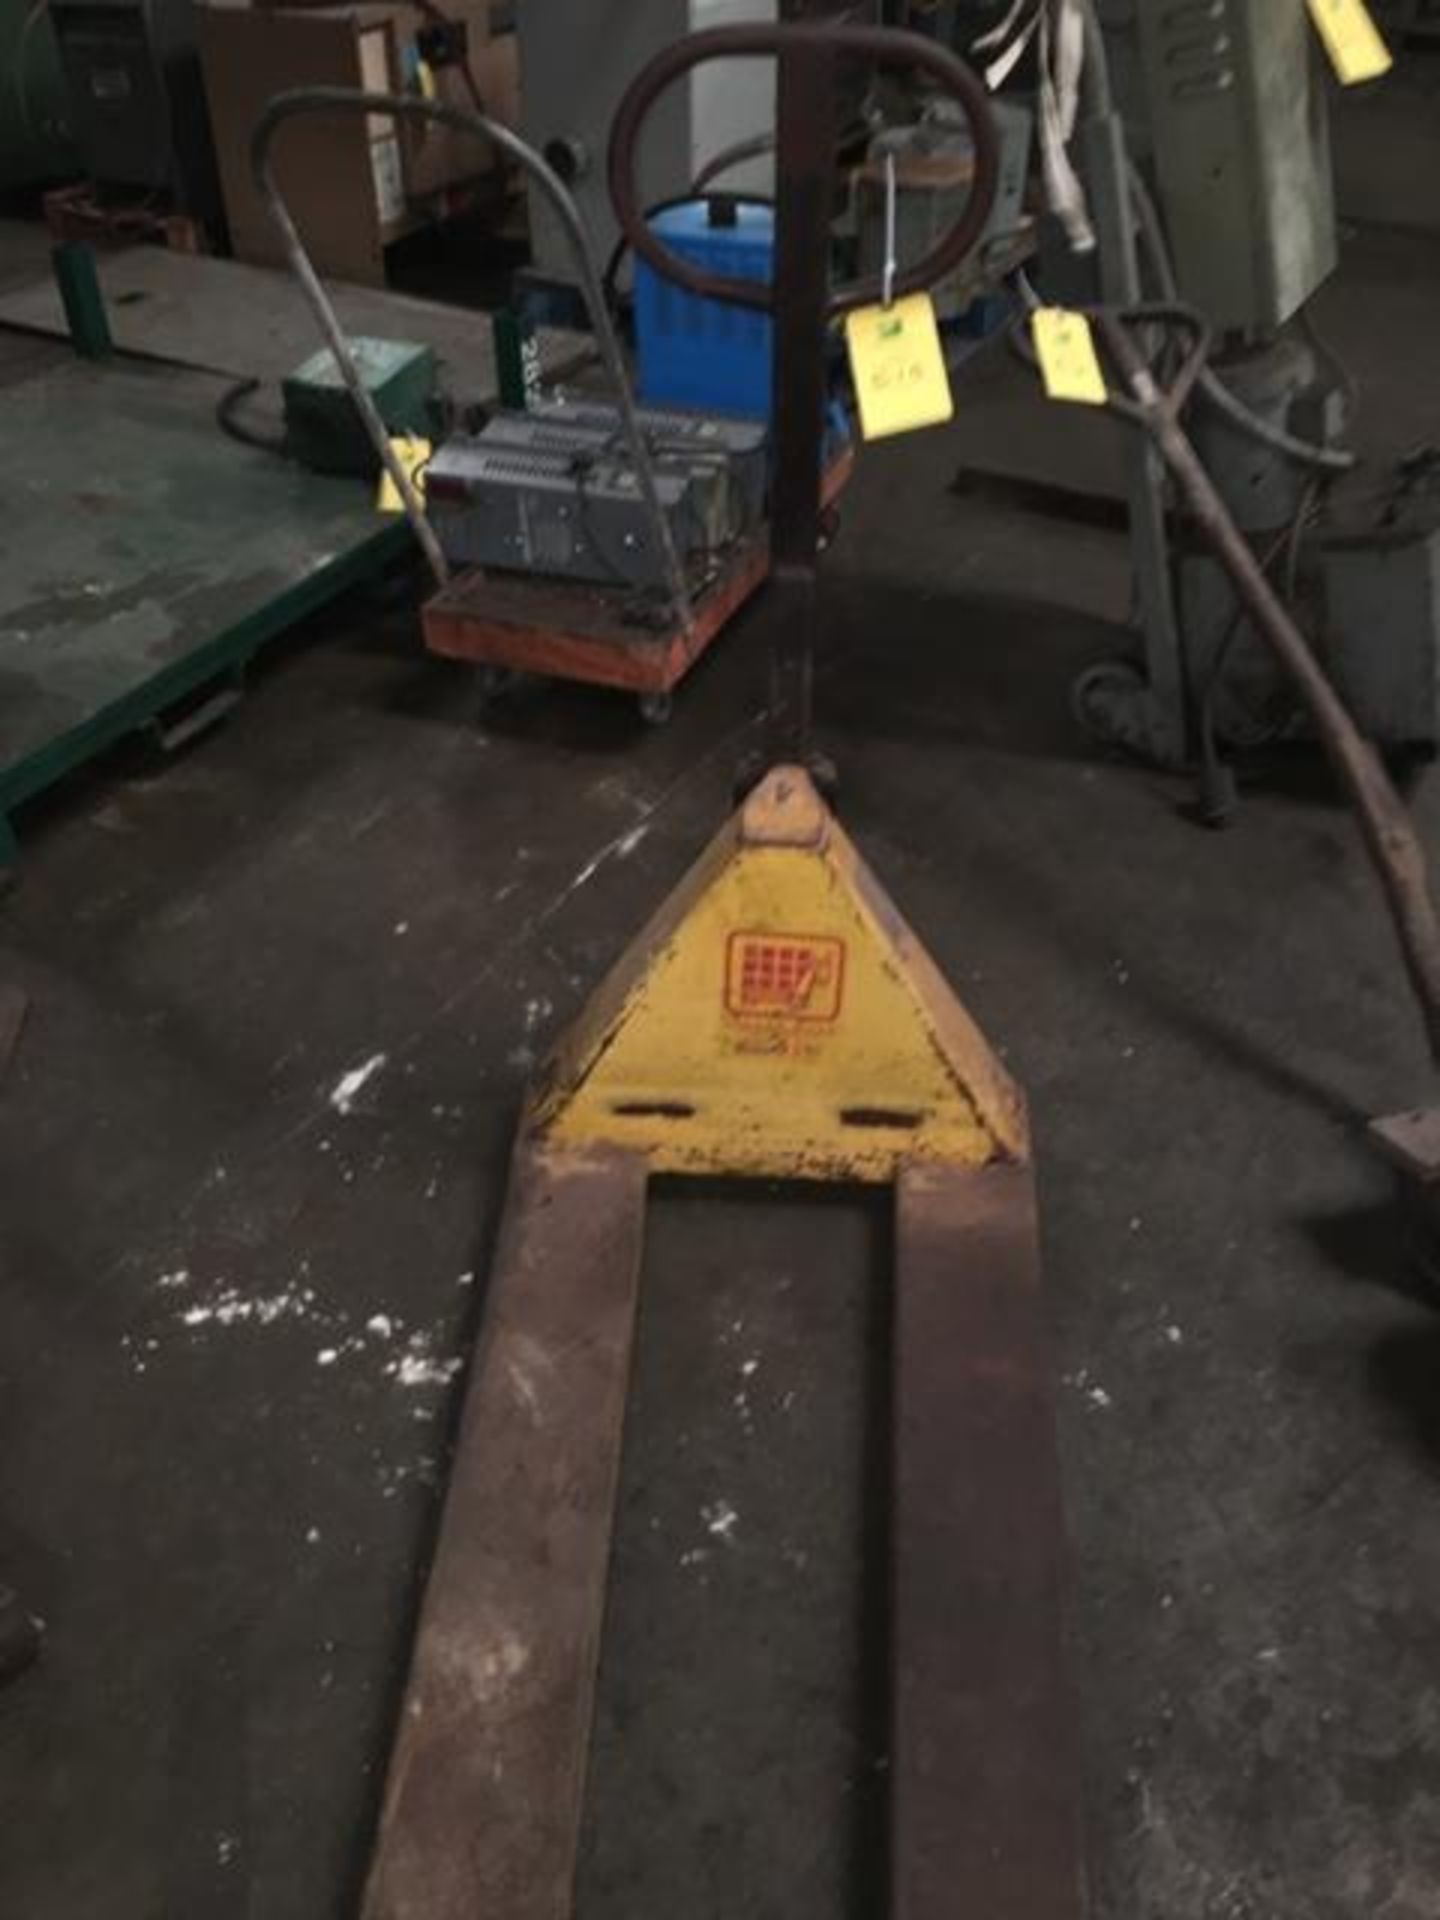 Pallet Jack, No ID Tag, Rigging Fee For This Item Is $25